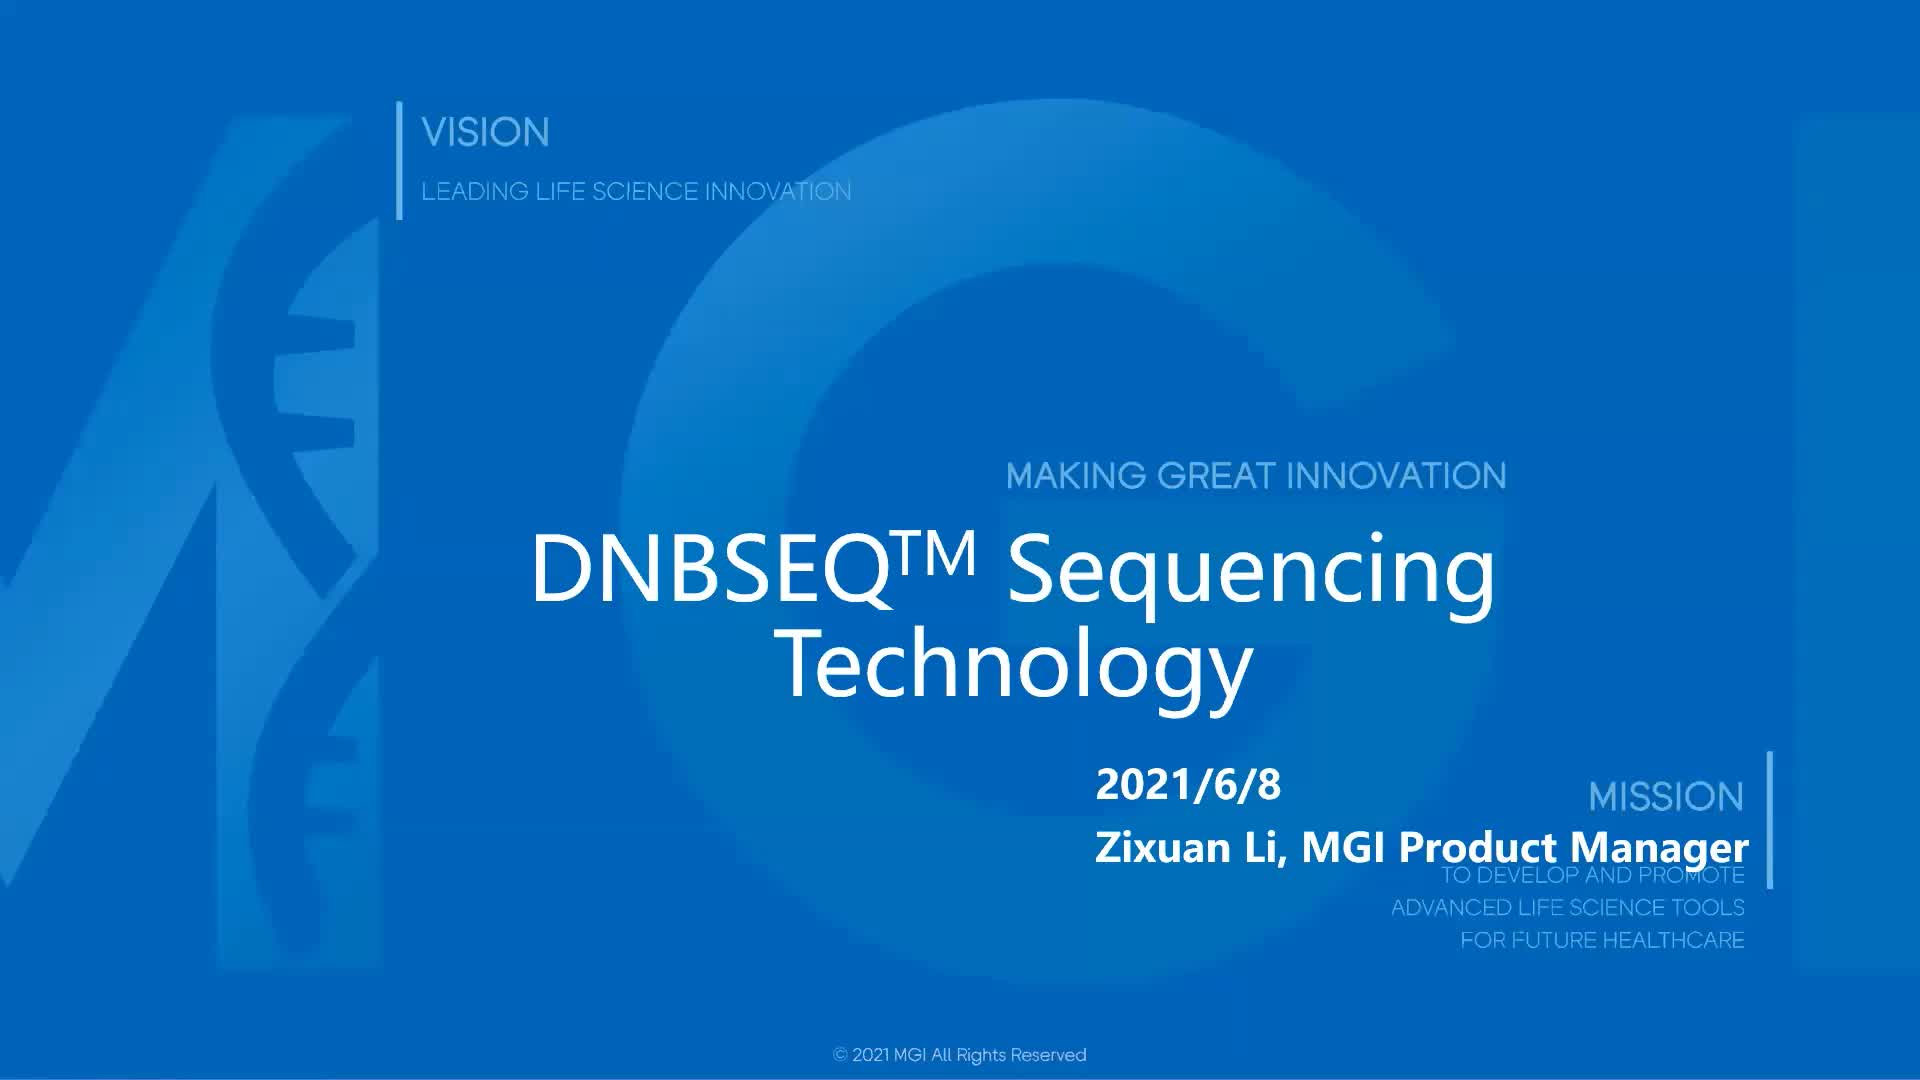 Massively Parallel Sequencing for SARS-CoV-2 Detection and Surveillance